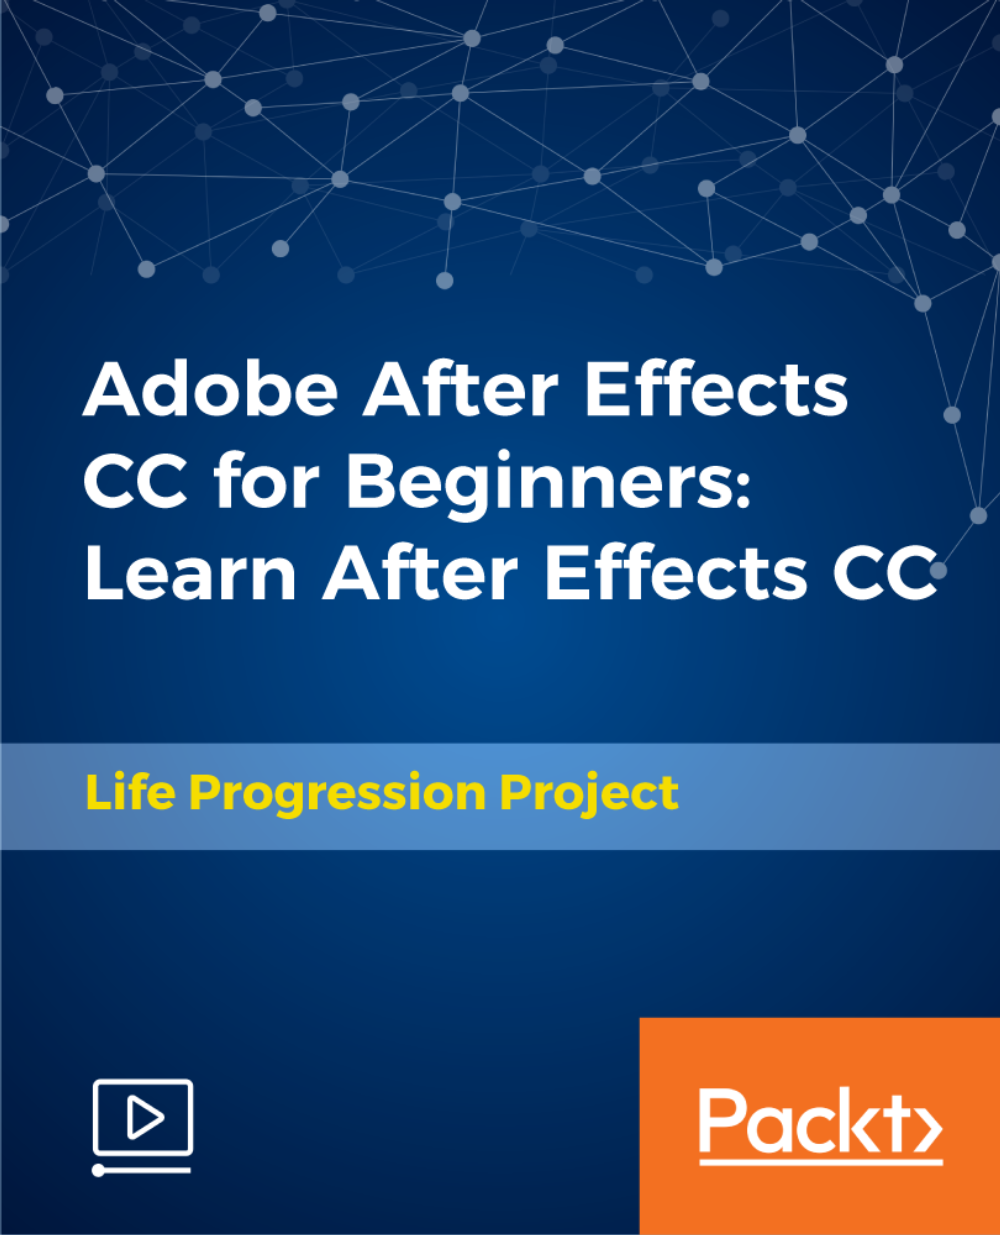 Adobe After Effects CC for Beginners: Learn After Effects CC